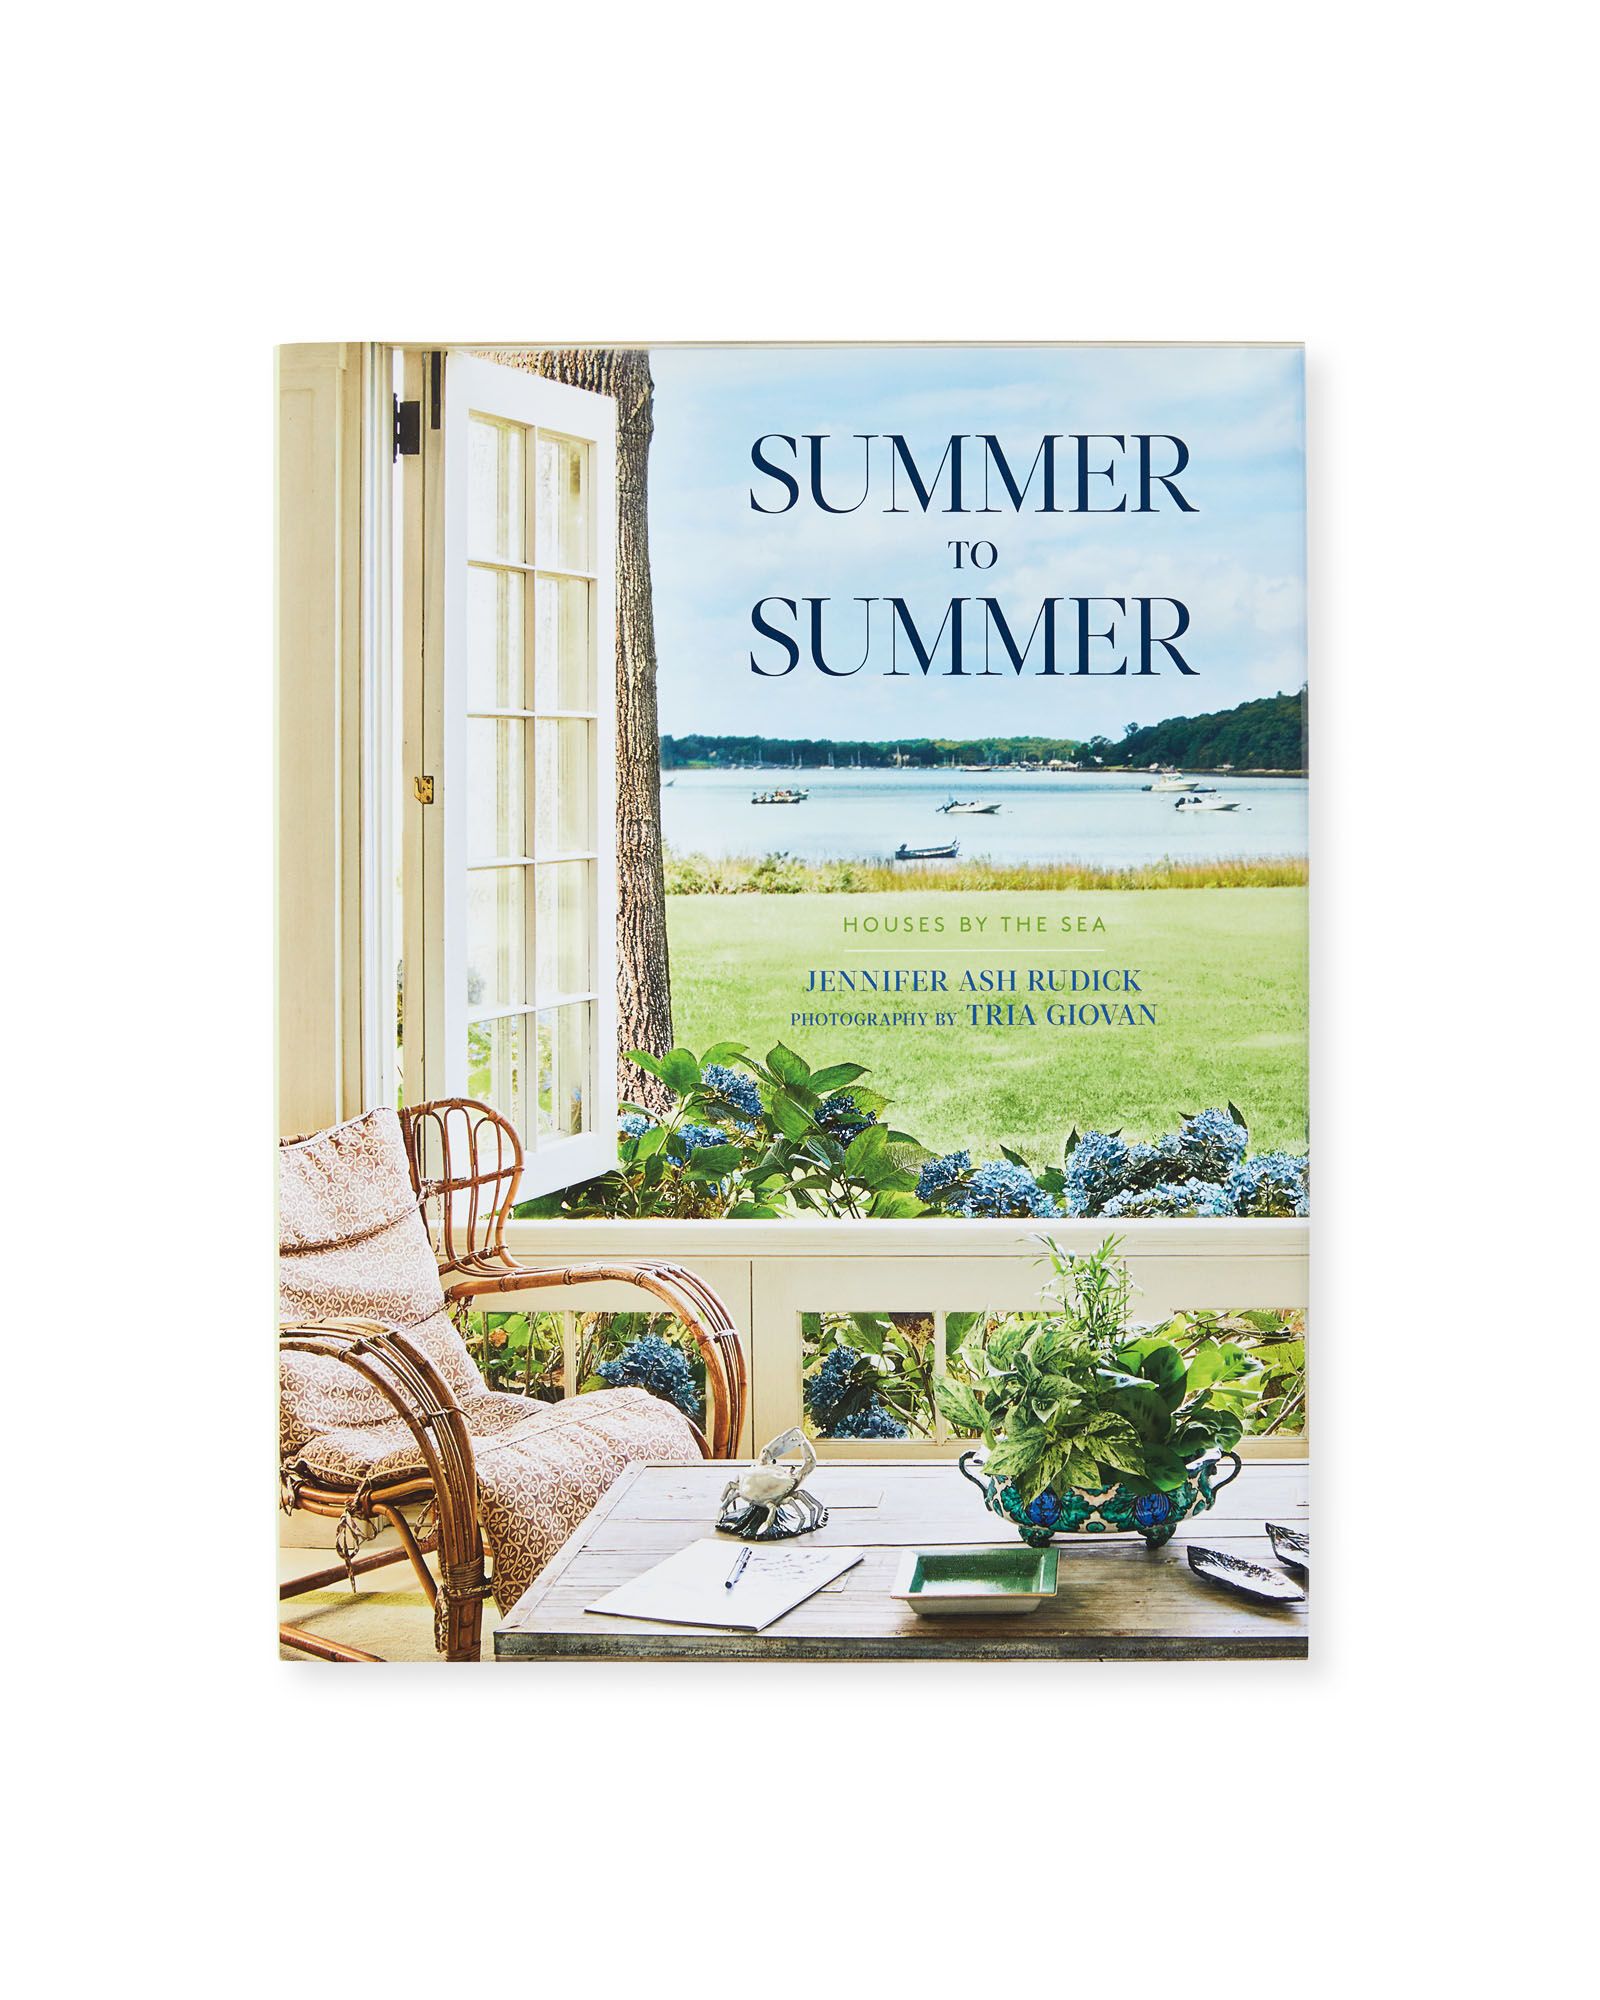 "Summer to Summer: Houses by the Sea" by Jennifer Ash Rudick | Serena and Lily